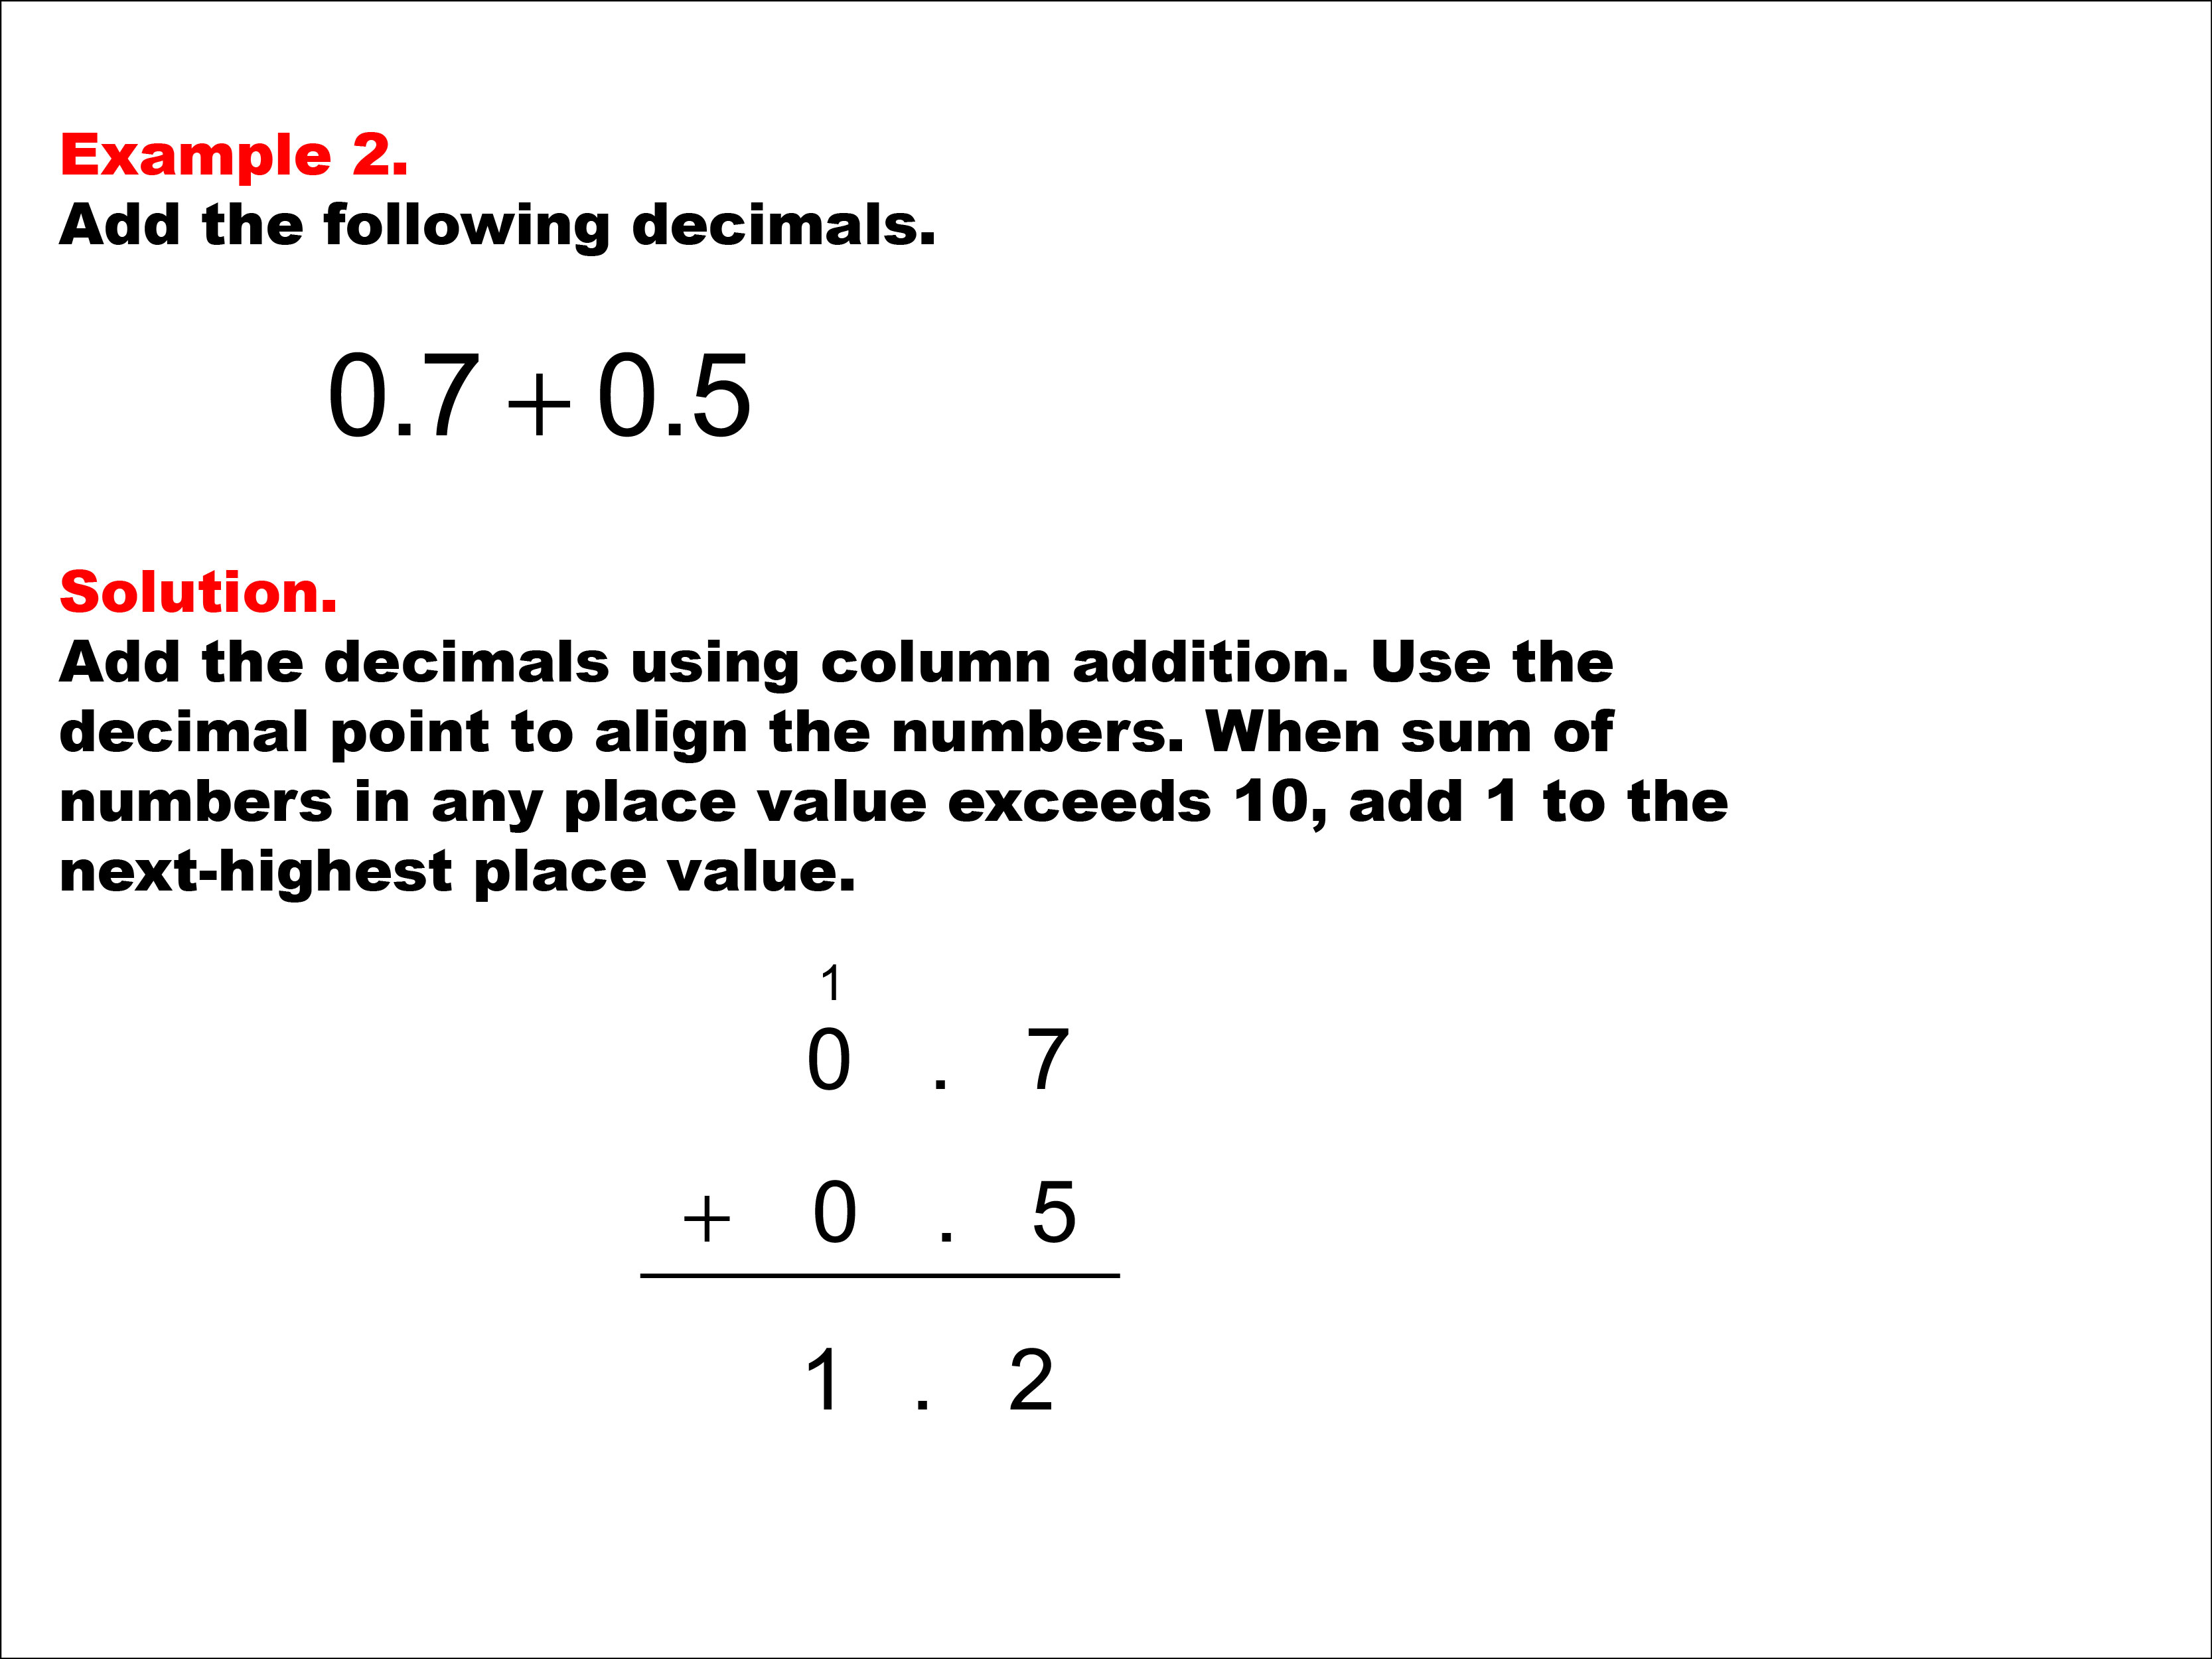 Adding Decimals: Example 2. Adding two decimals written to the tenths place, with the decimal sum exceeding 1. The numbers have zero in the ones place.To see the complete collection of Math Examples on this topic, click on this link: https://bit.ly/3g5Dke3